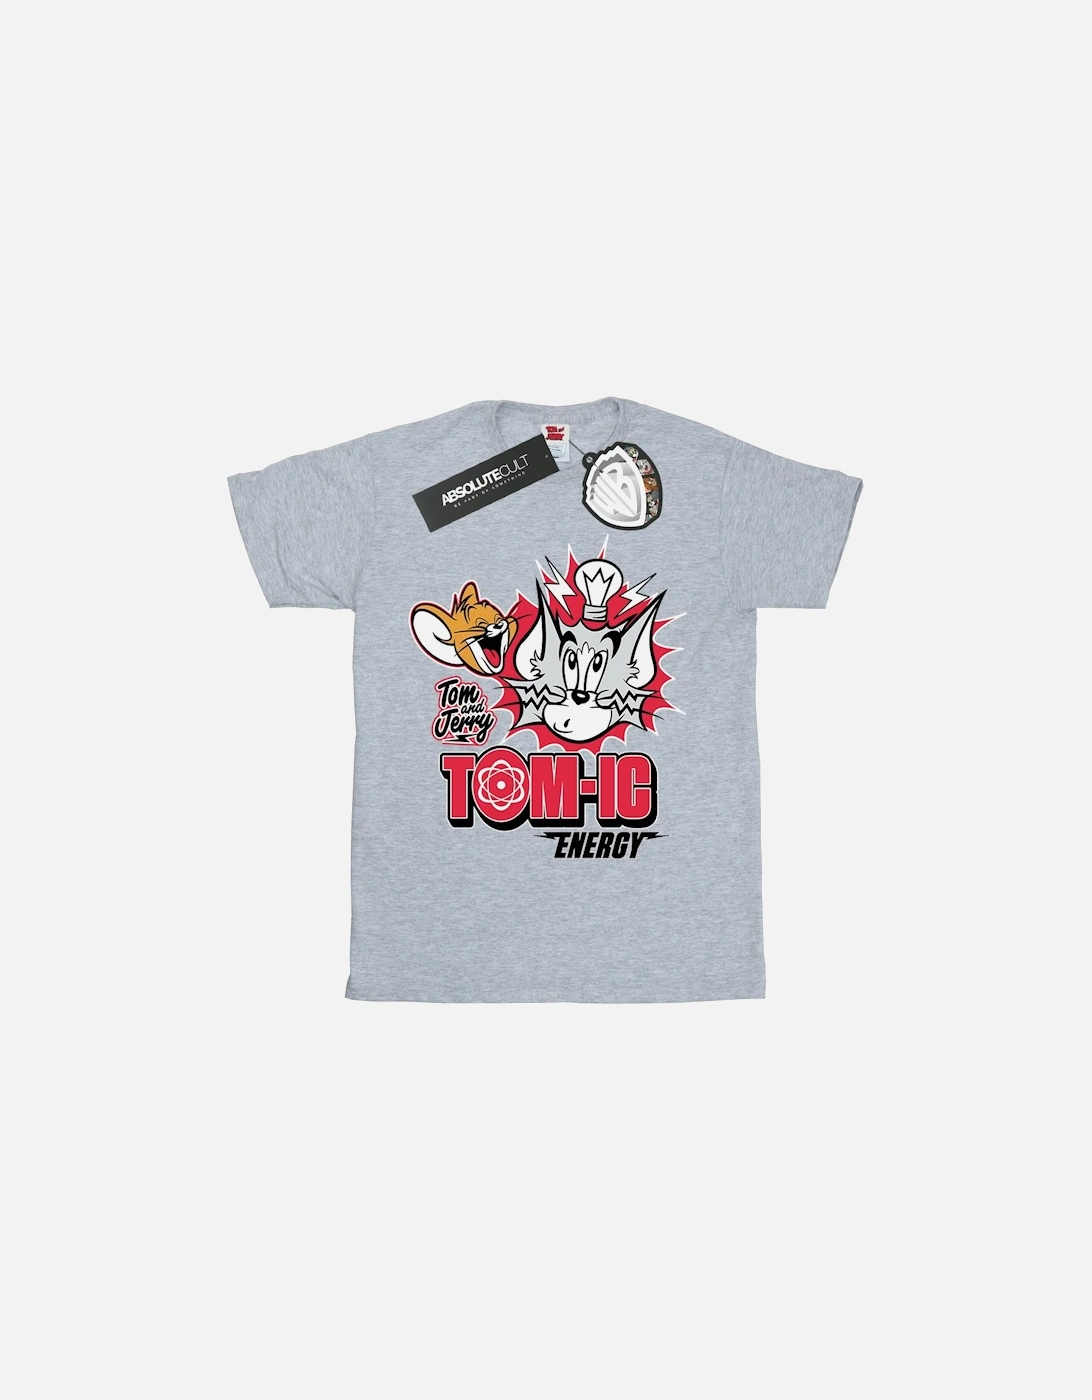 Tom And Jerry Boys Tomic Energy T-Shirt, 6 of 5